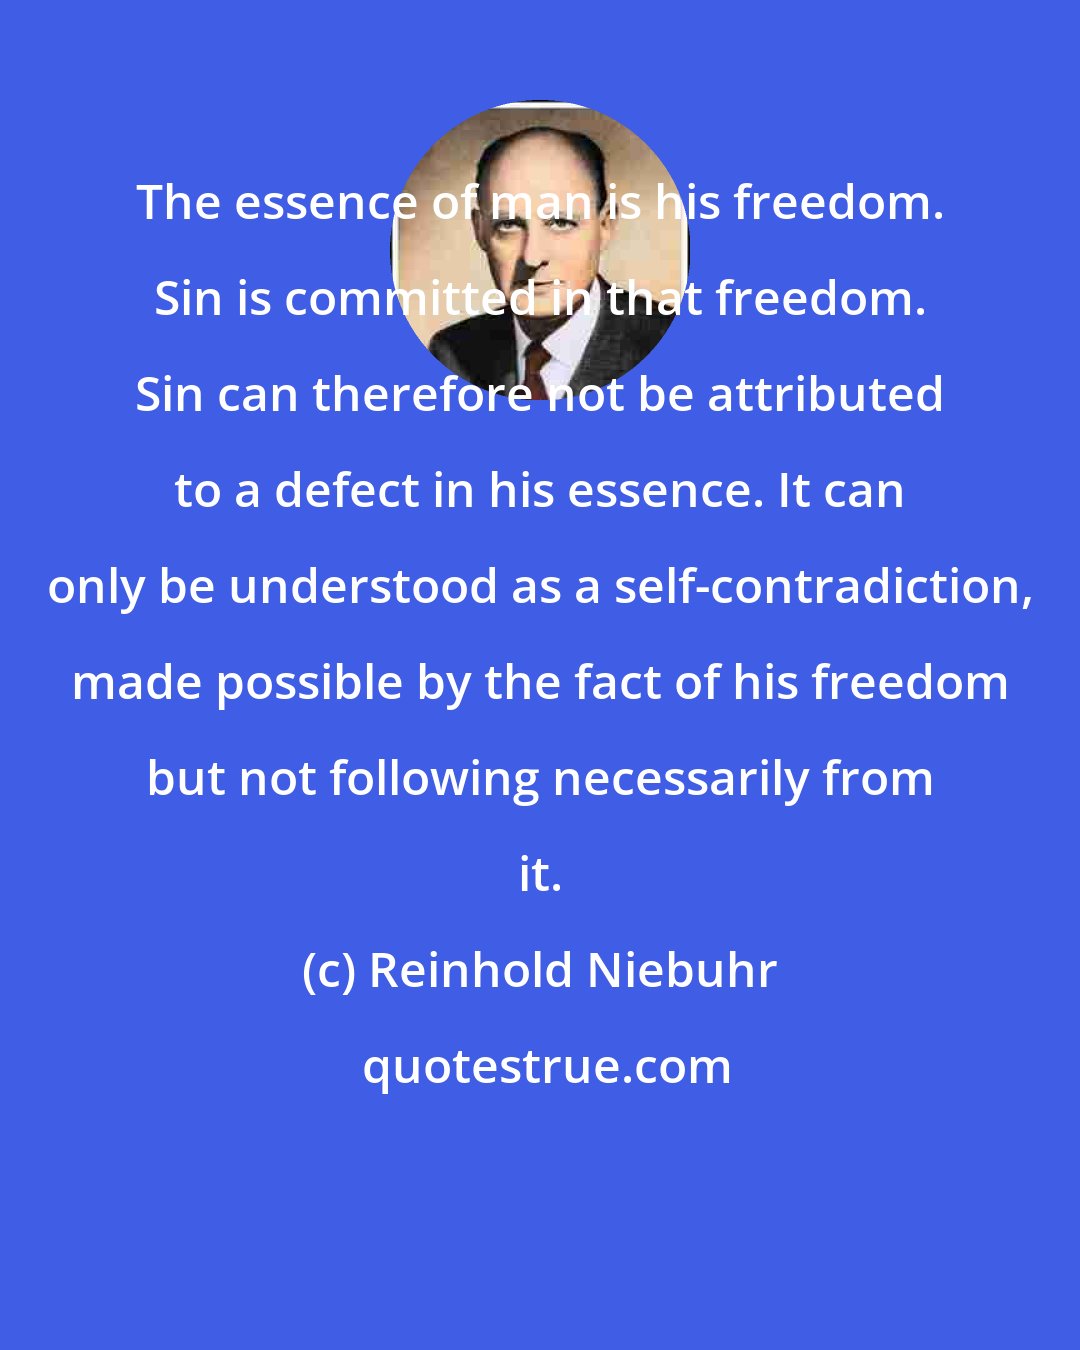 Reinhold Niebuhr: The essence of man is his freedom. Sin is committed in that freedom. Sin can therefore not be attributed to a defect in his essence. It can only be understood as a self-contradiction, made possible by the fact of his freedom but not following necessarily from it.